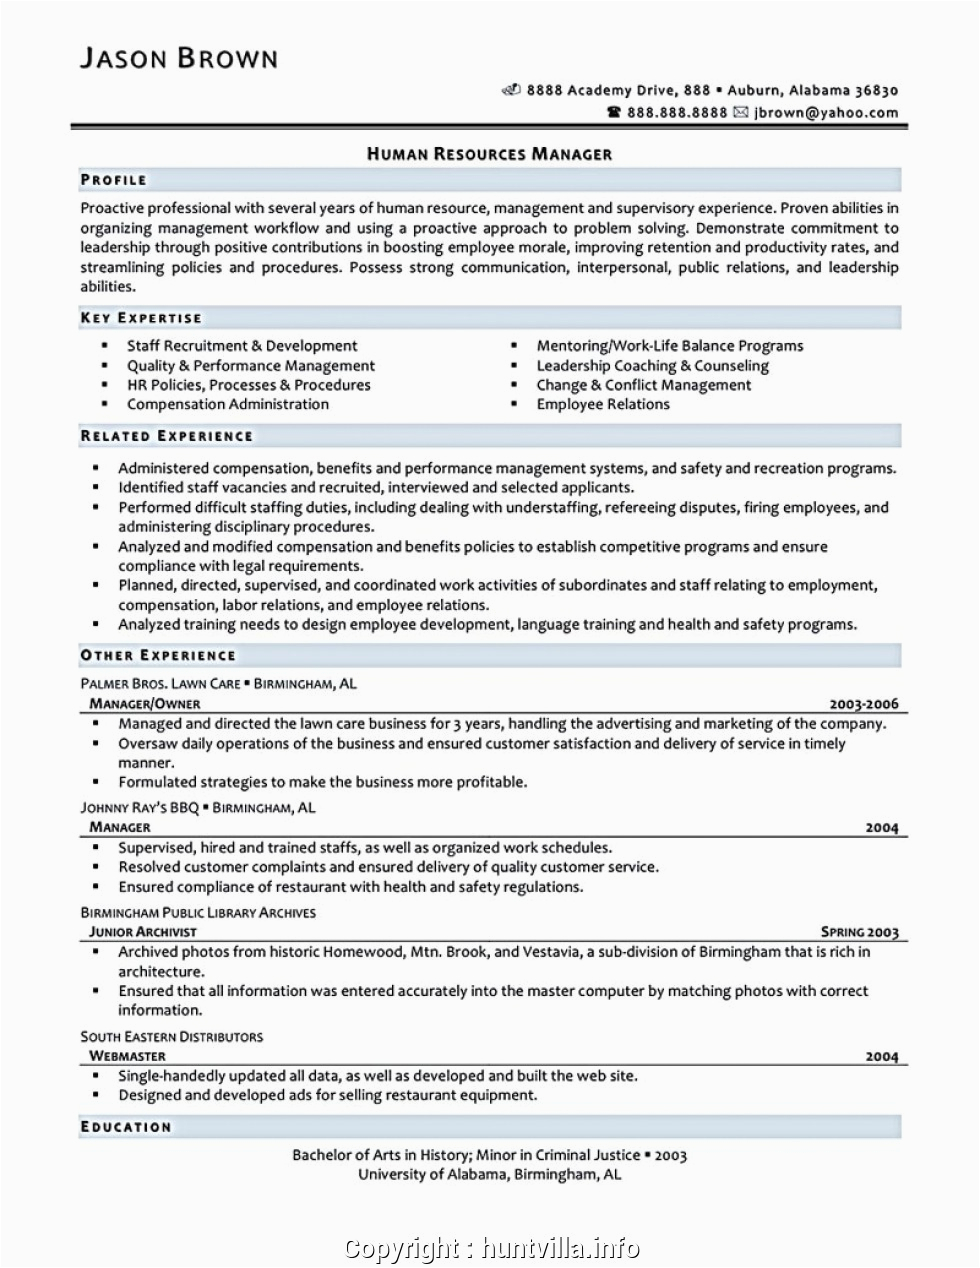 Human Resources Sample Resume Entry Level Simply Human Resources assistant Cv Entry Level Human